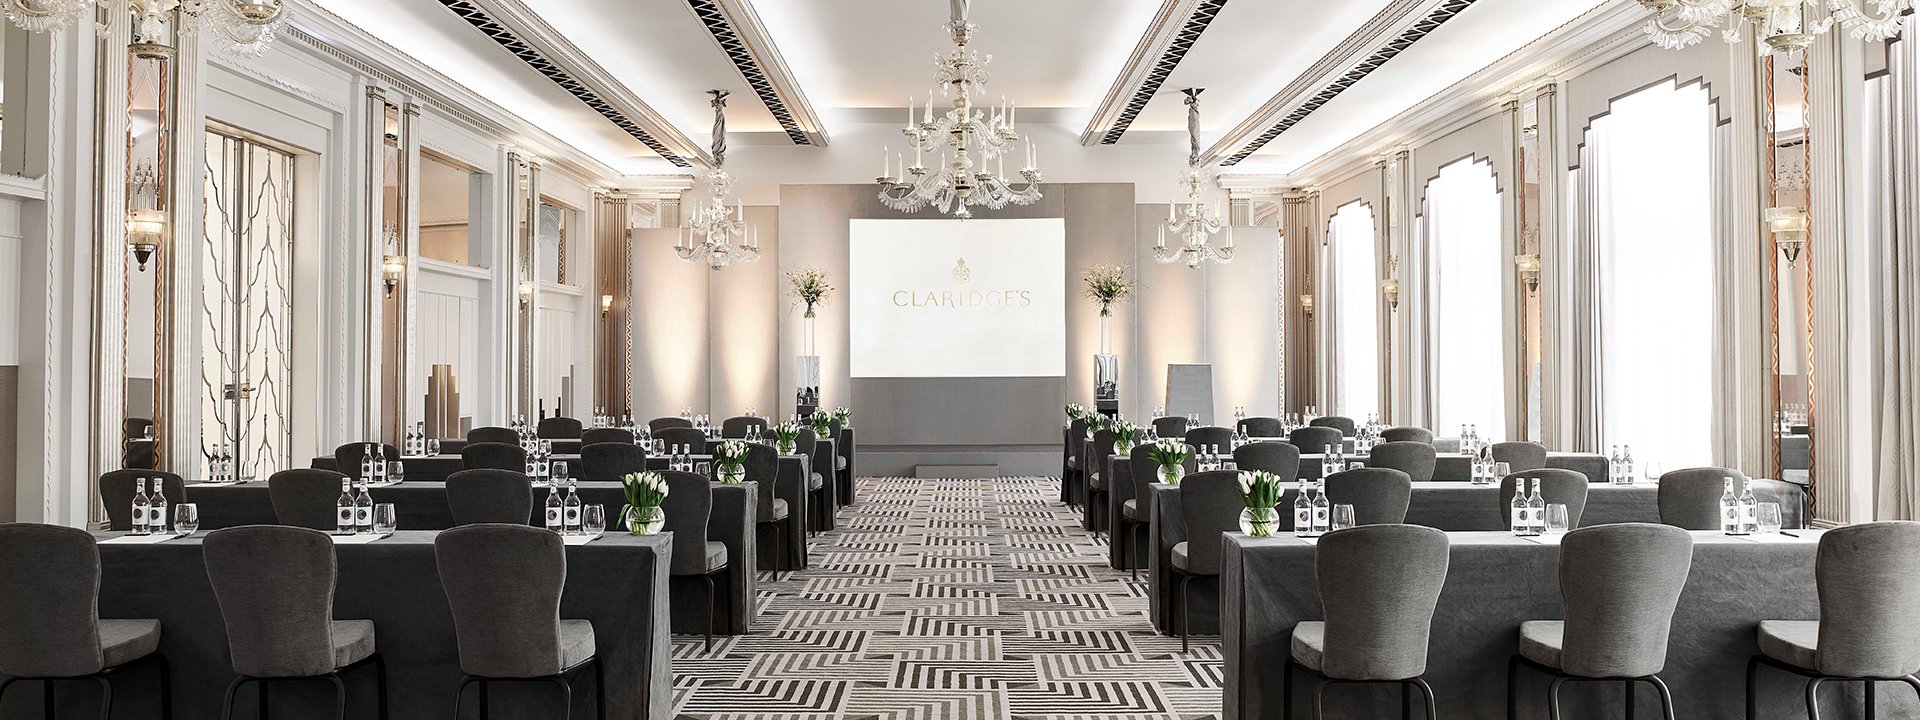 A spacious room for business events, in grey tones that exude functionality and elegance.